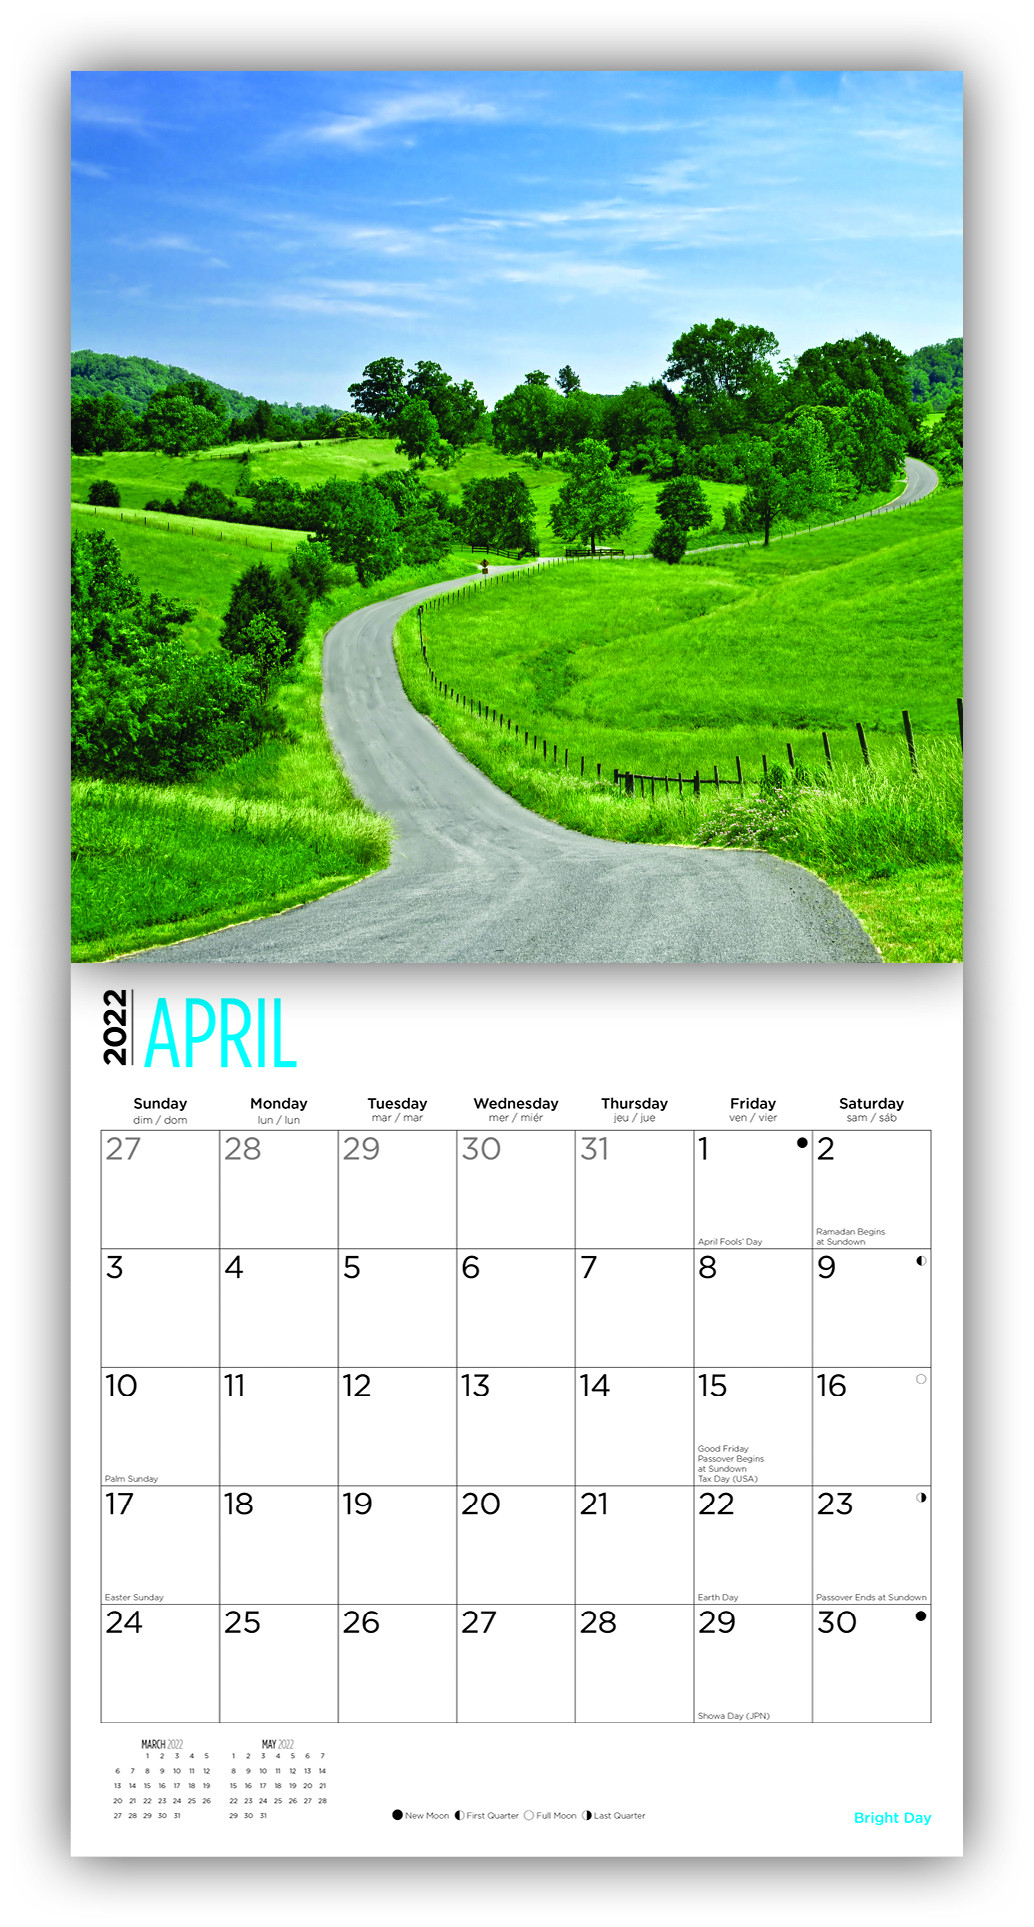 2022 Country Roads Wall Calendarbright Day, 12 X 12  Astronomy Picture Of The Day Calendar December 2022